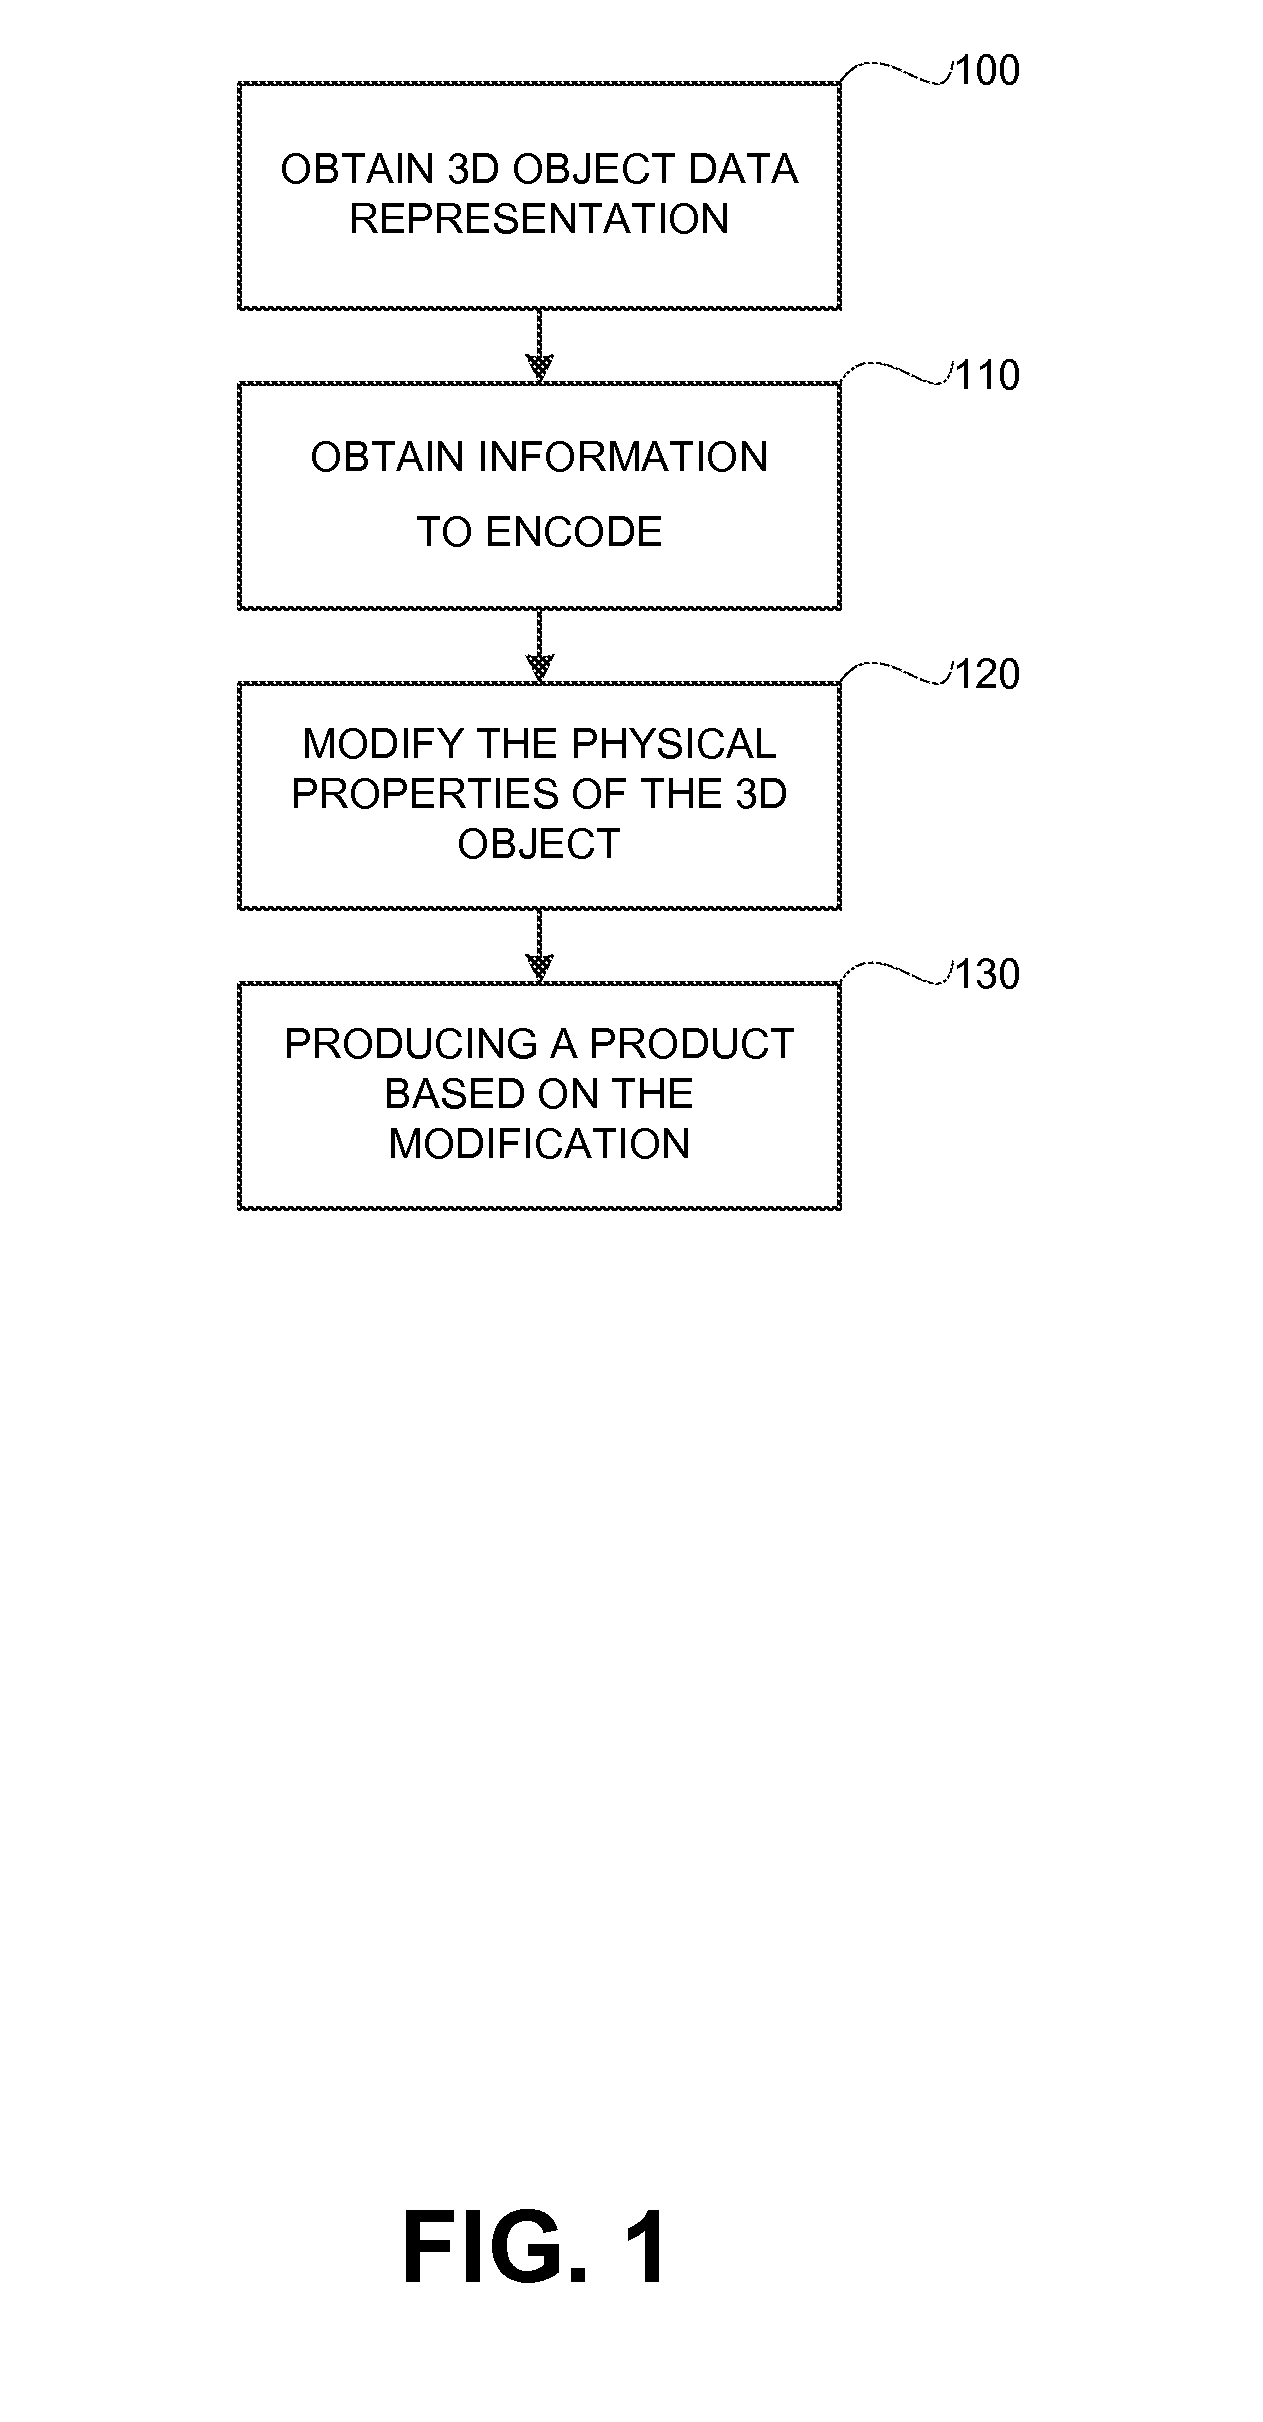 Encoding information in physical properties of an object